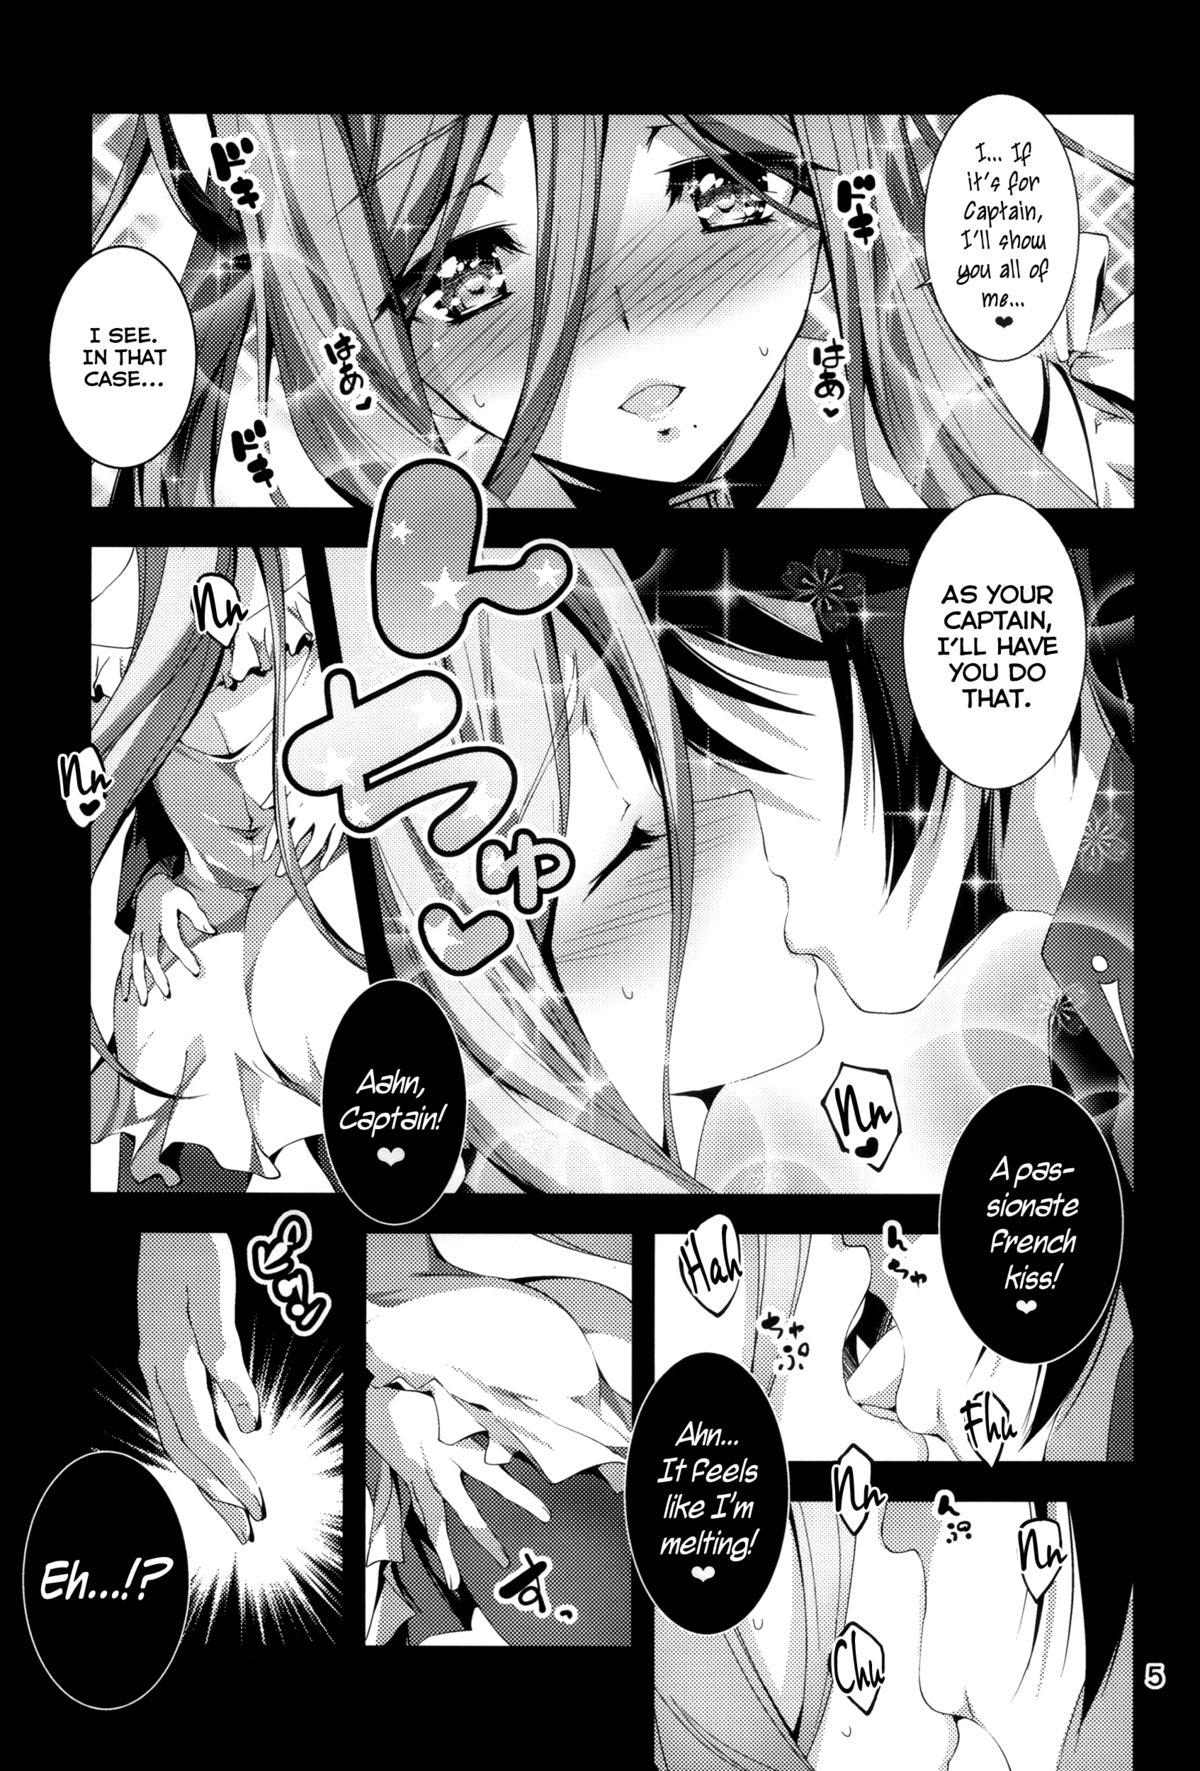 Speculum Takao Plug In! - Arpeggio of blue steel Nasty Porn - Page 6